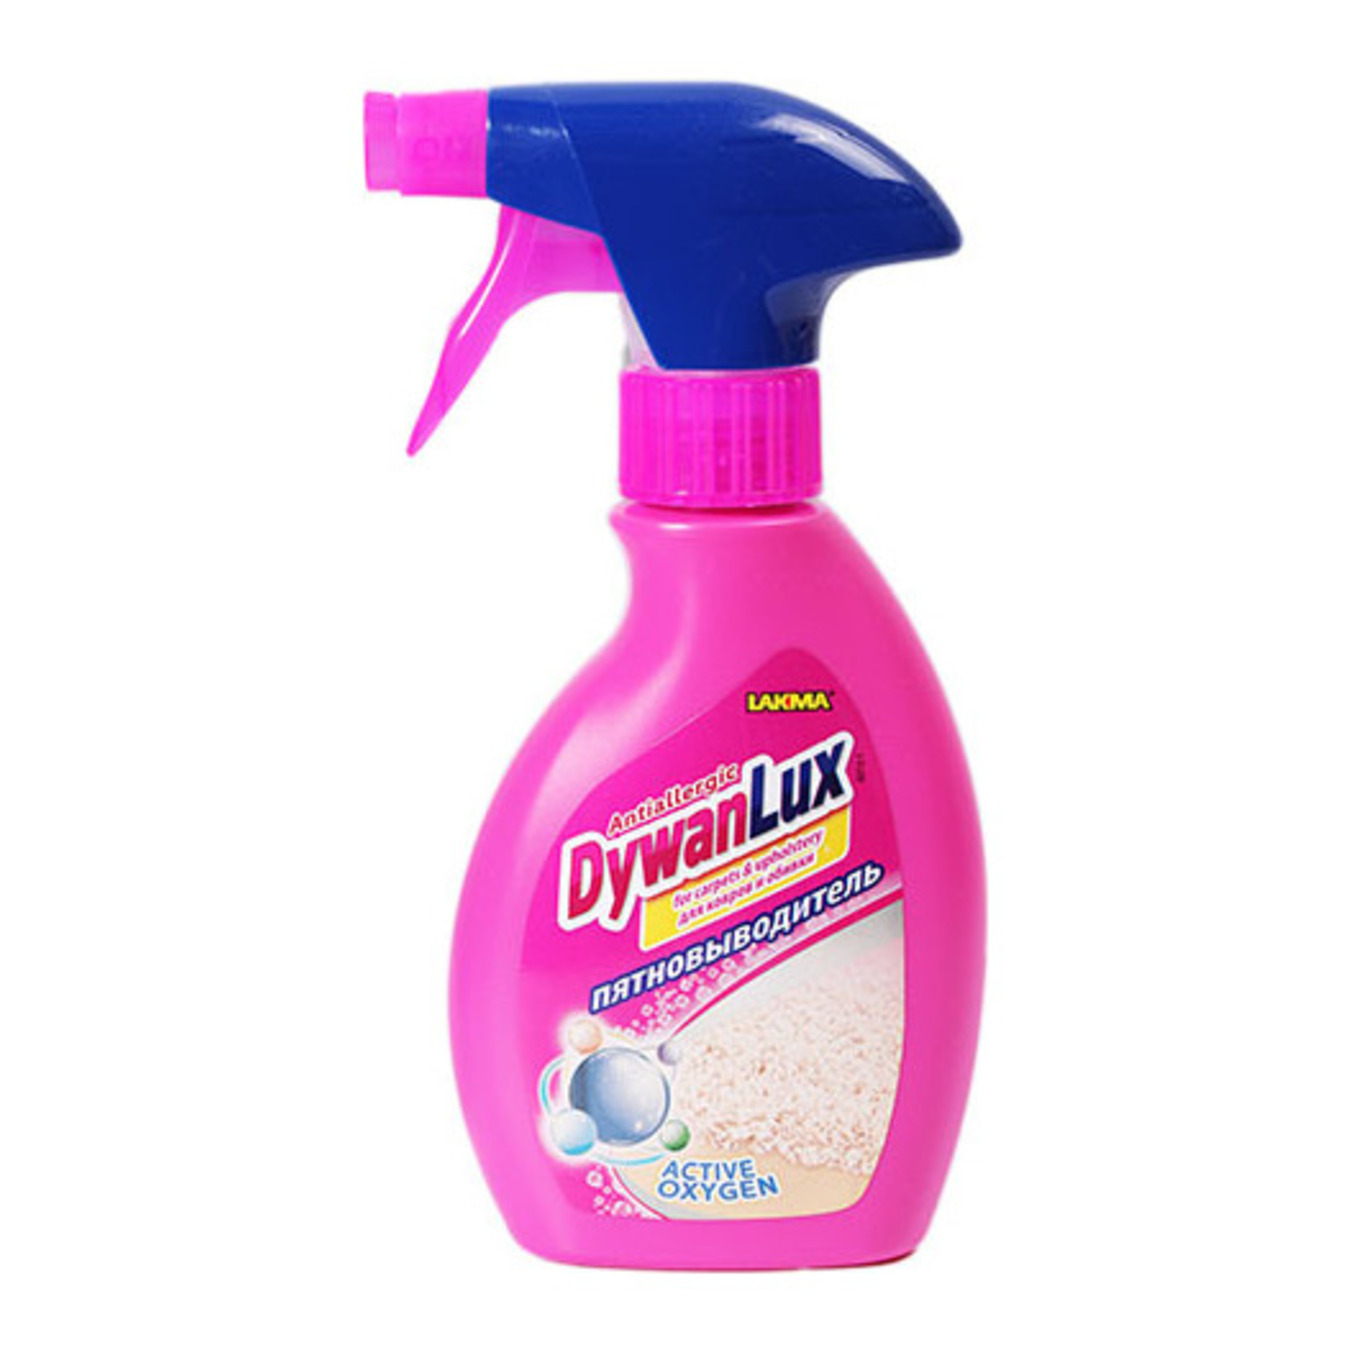 Stain Remover DywanLux For Carpets 200ml